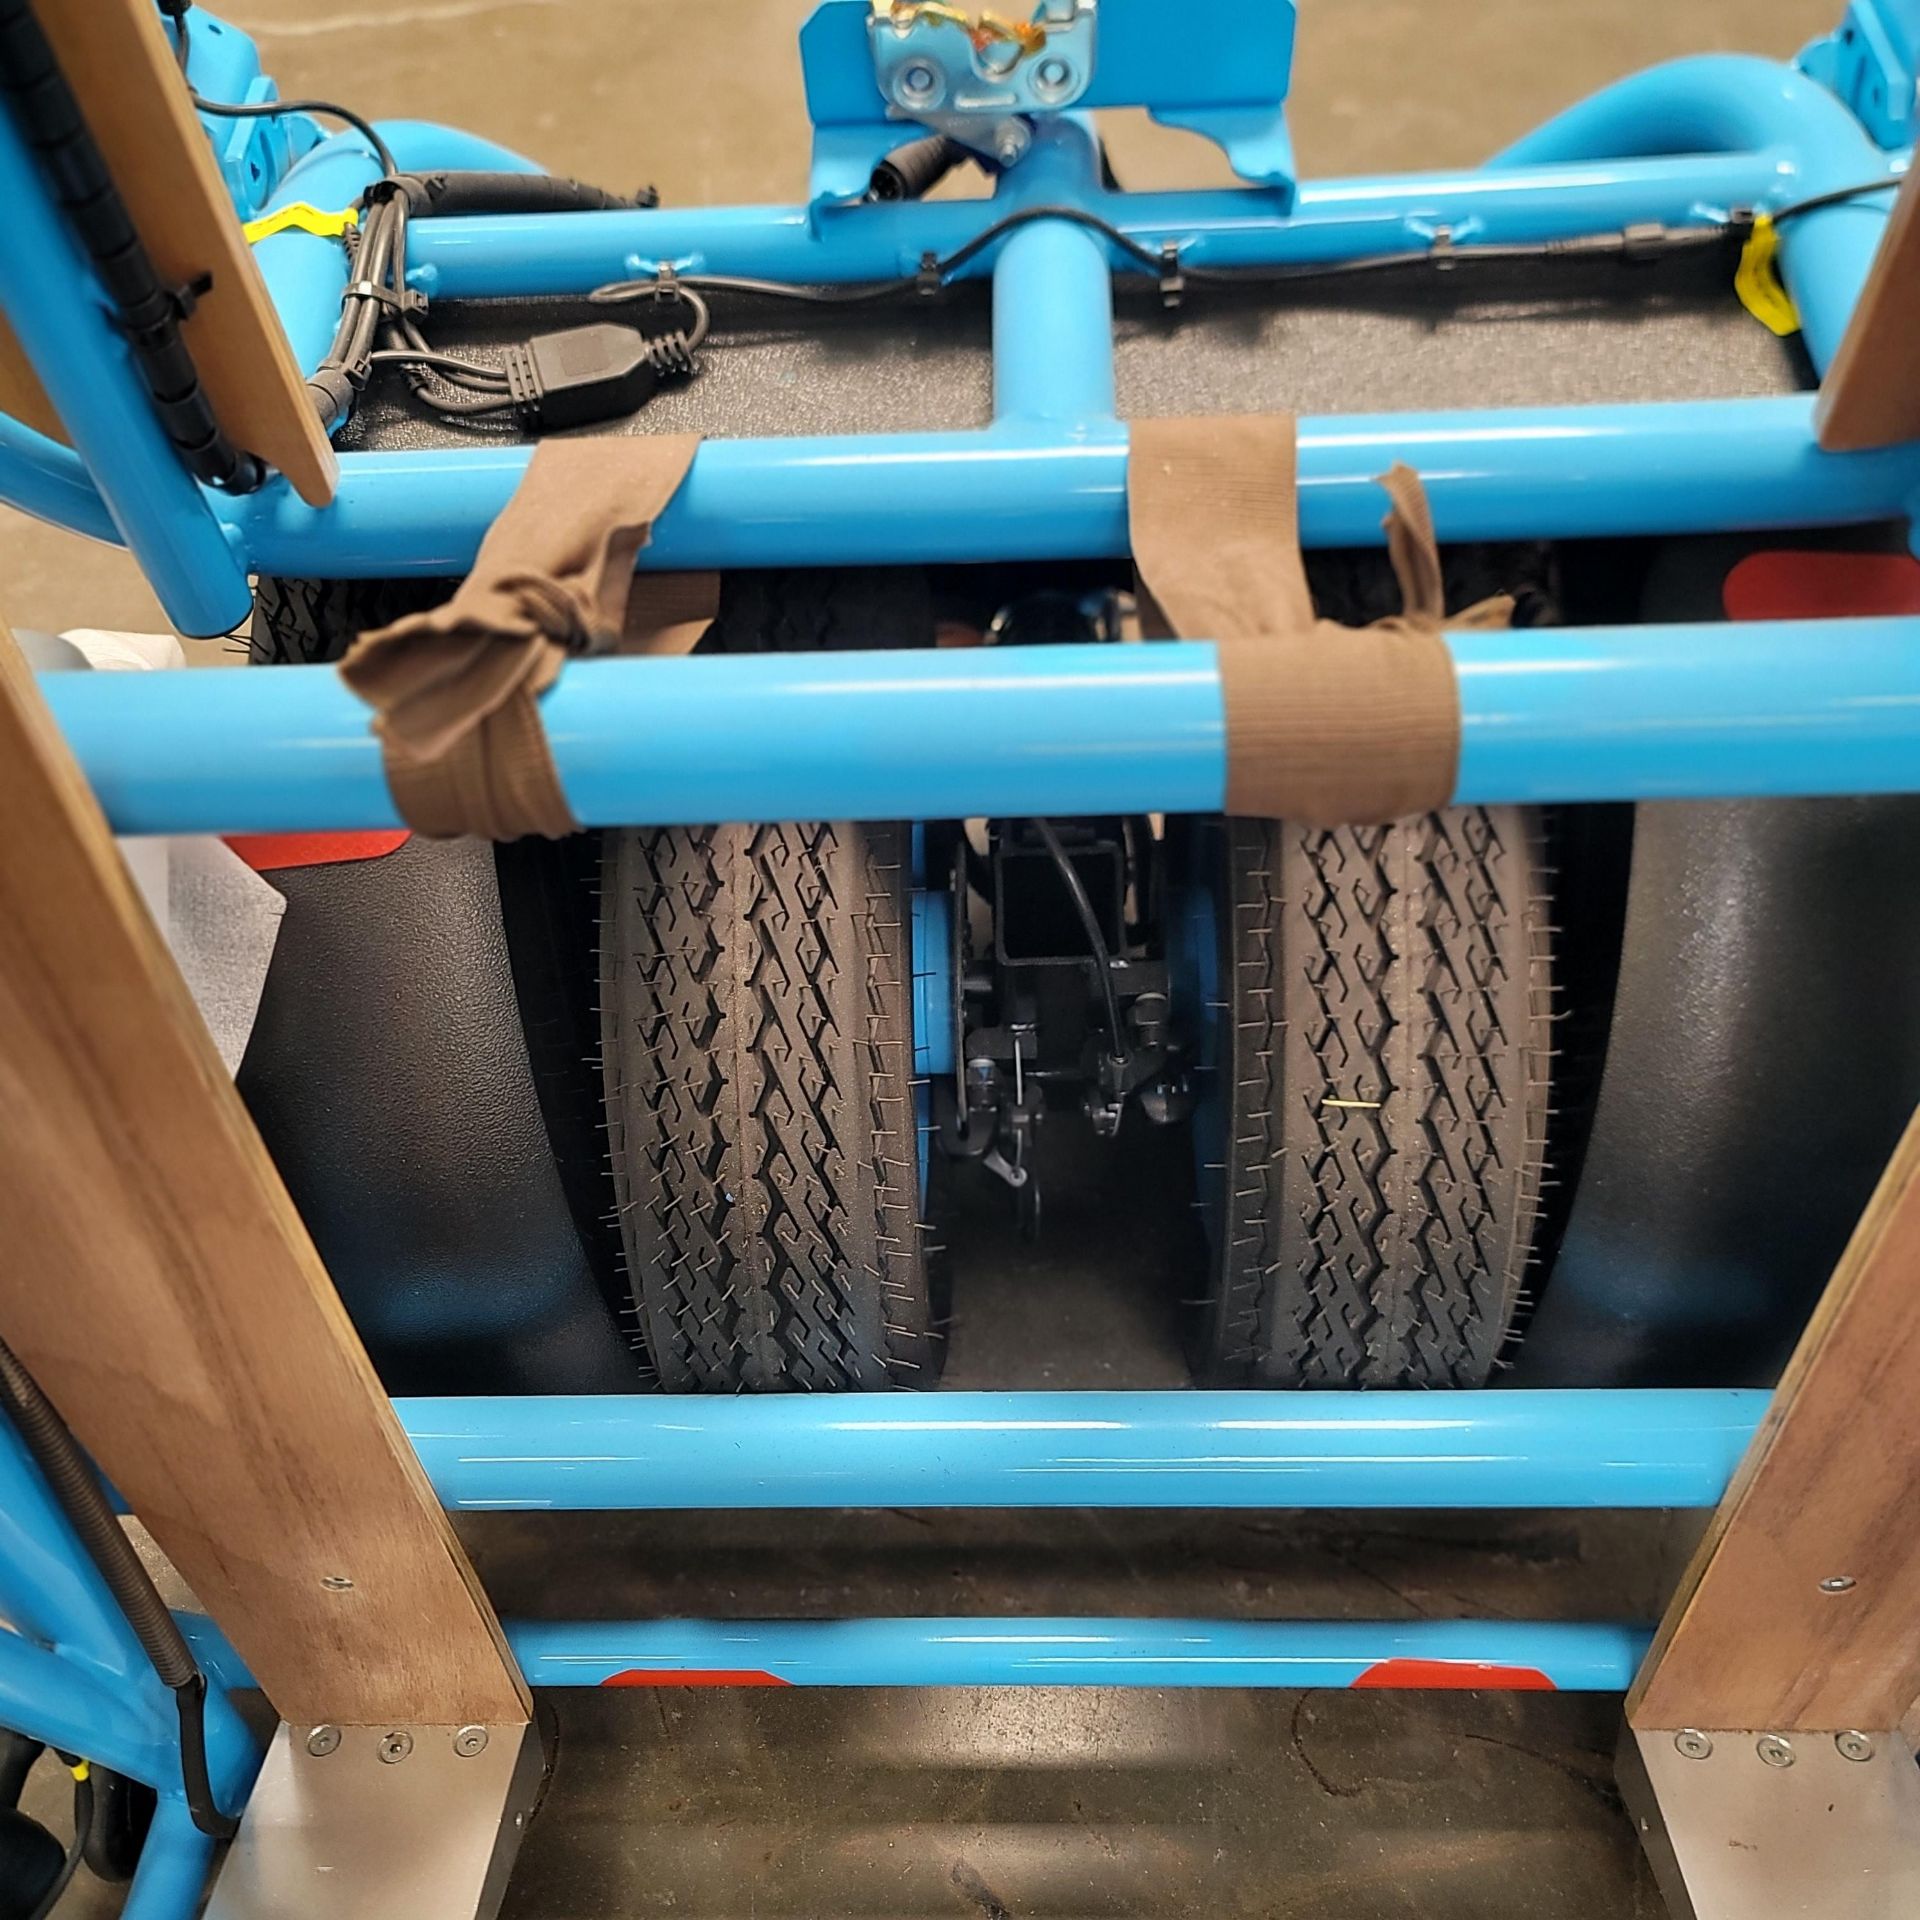 TOWABLE ROLL ON ROLL OFF TRAILER, W/ ELECTRIC LIFT, HYDRAULIC REAR BRAKES, COIL OVER SUSPENSION, - Image 3 of 4